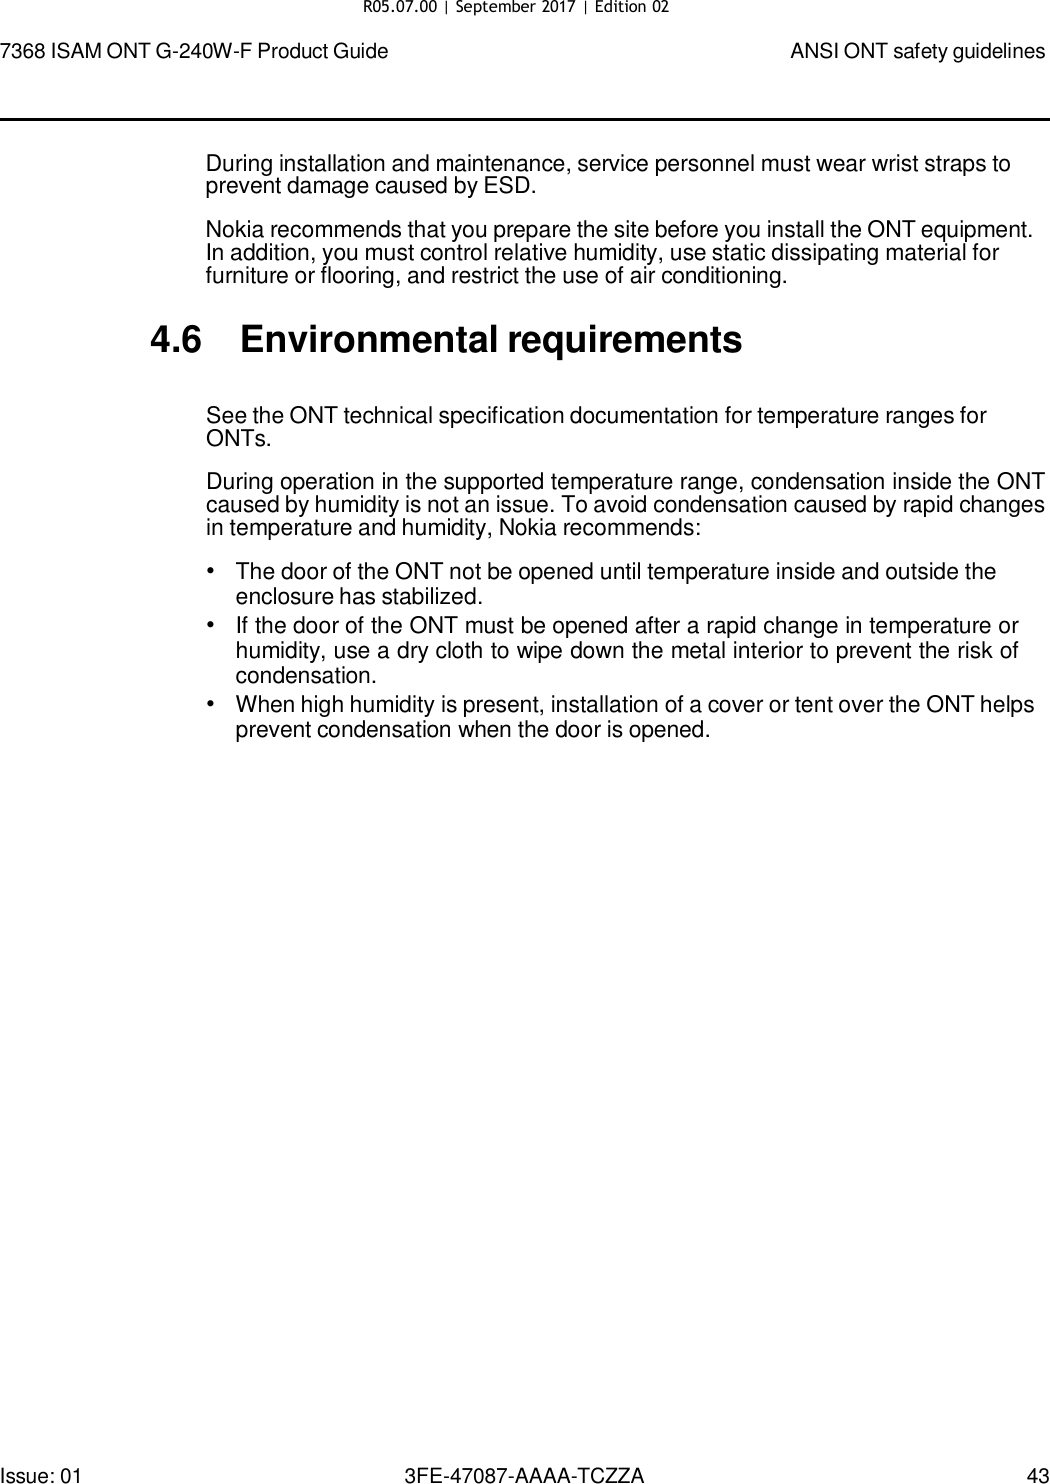 Page 40 of Nokia Bell G240WFV2 7368 ISAM GPON ONU User Manual 7368 ISAM ONT G 240W F Product Guide